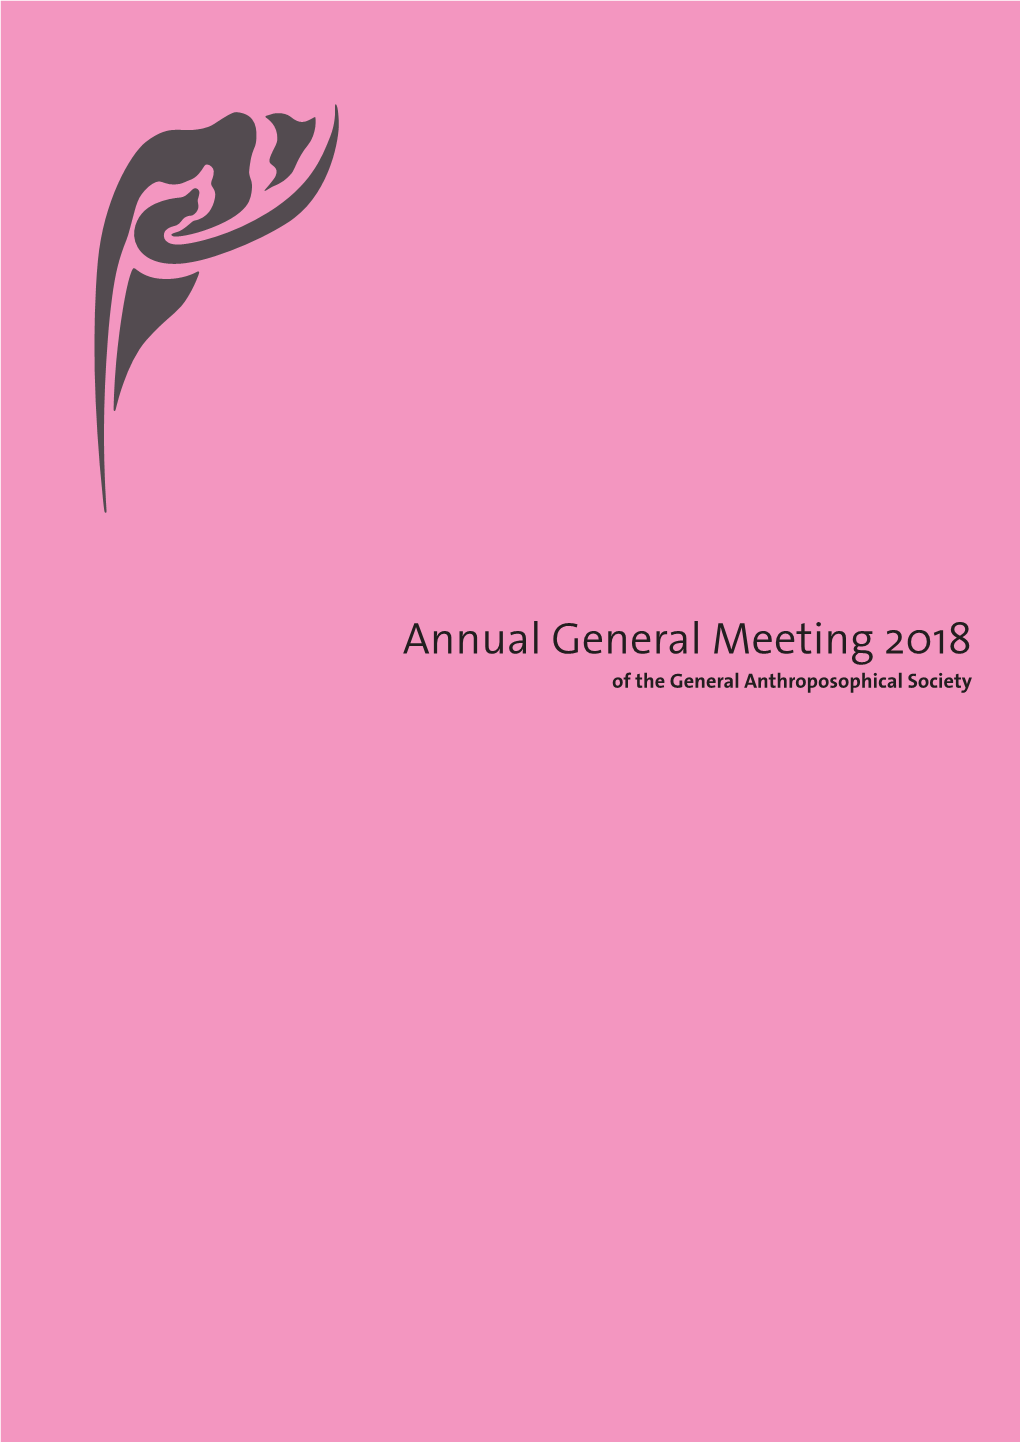 Annual General Meeting 2018 of the General Anthroposophical Society Contents